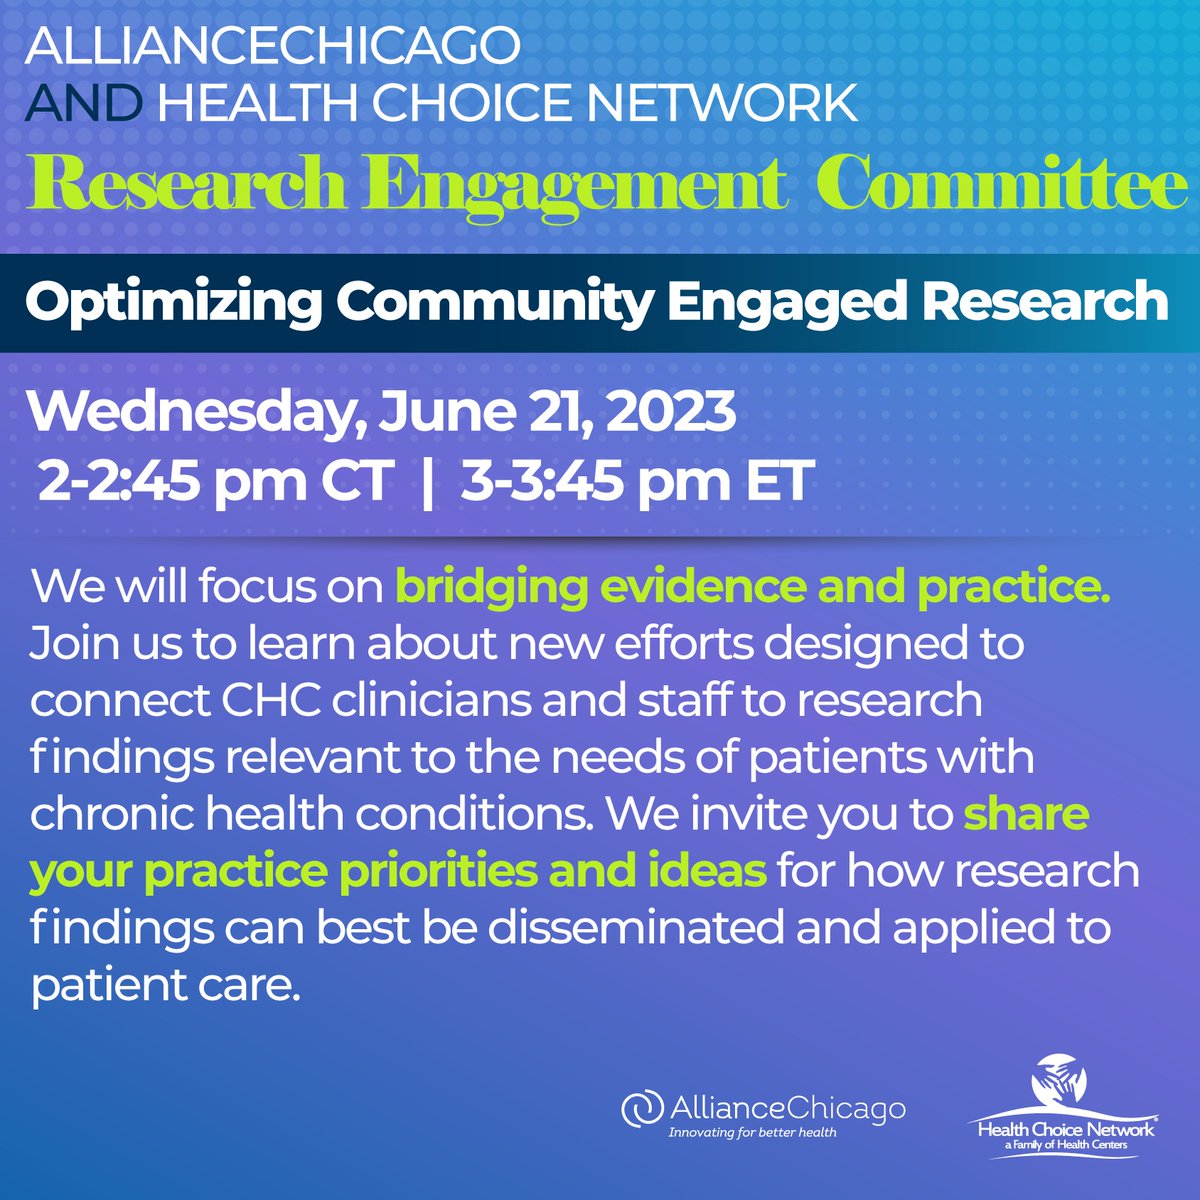 Join @alliancecchs  and HCN for our Research Engagement Committee (REC) meeting today where we will focus on bridging evidence and practice. 
 
Register today! teams.microsoft.com/registration/r…

#research #AC #alliancechicago #HCN #FQHCs #HCCNs #REC #communityresearch #patientcare #CHCs